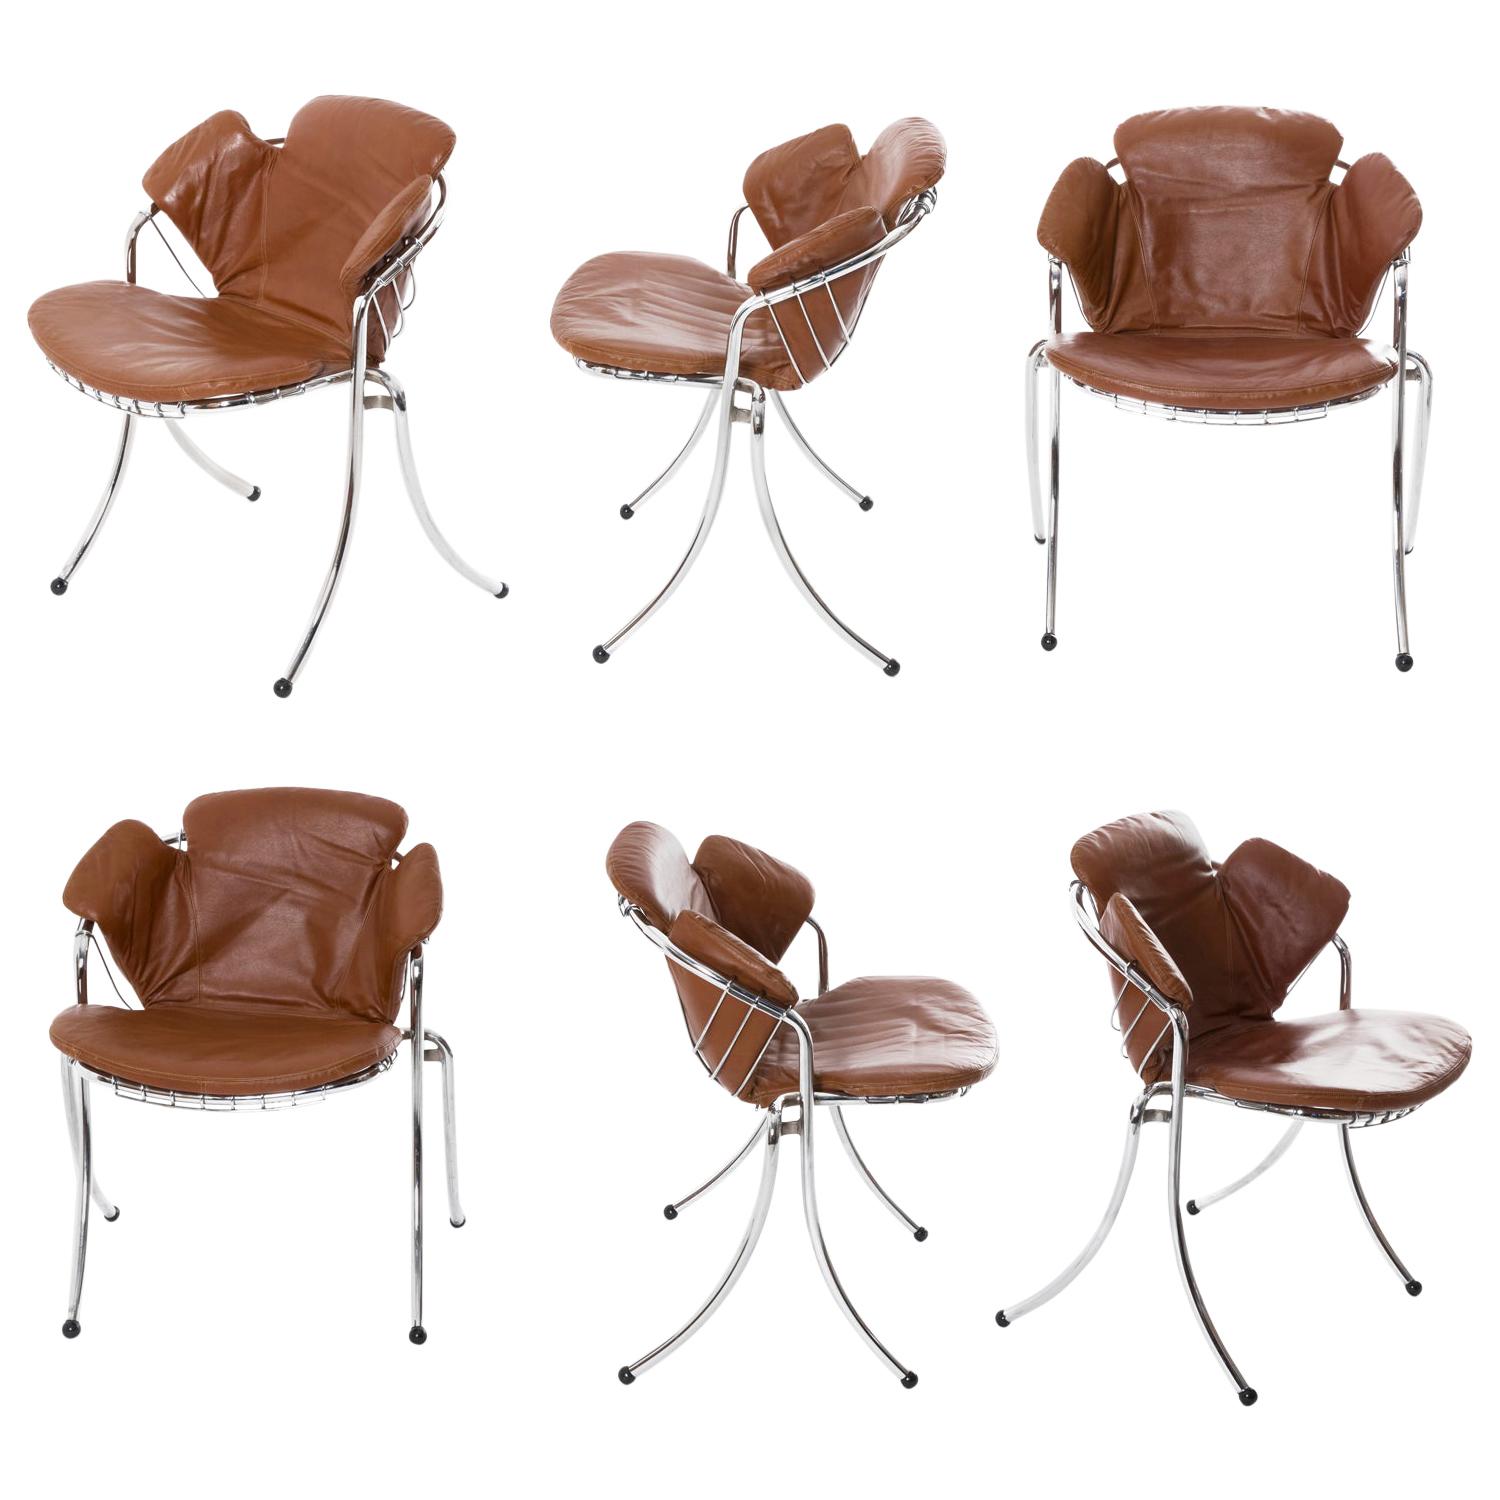 "Lynn" Set of 6 Chrome and Leather Chairs for RIMA, 1970